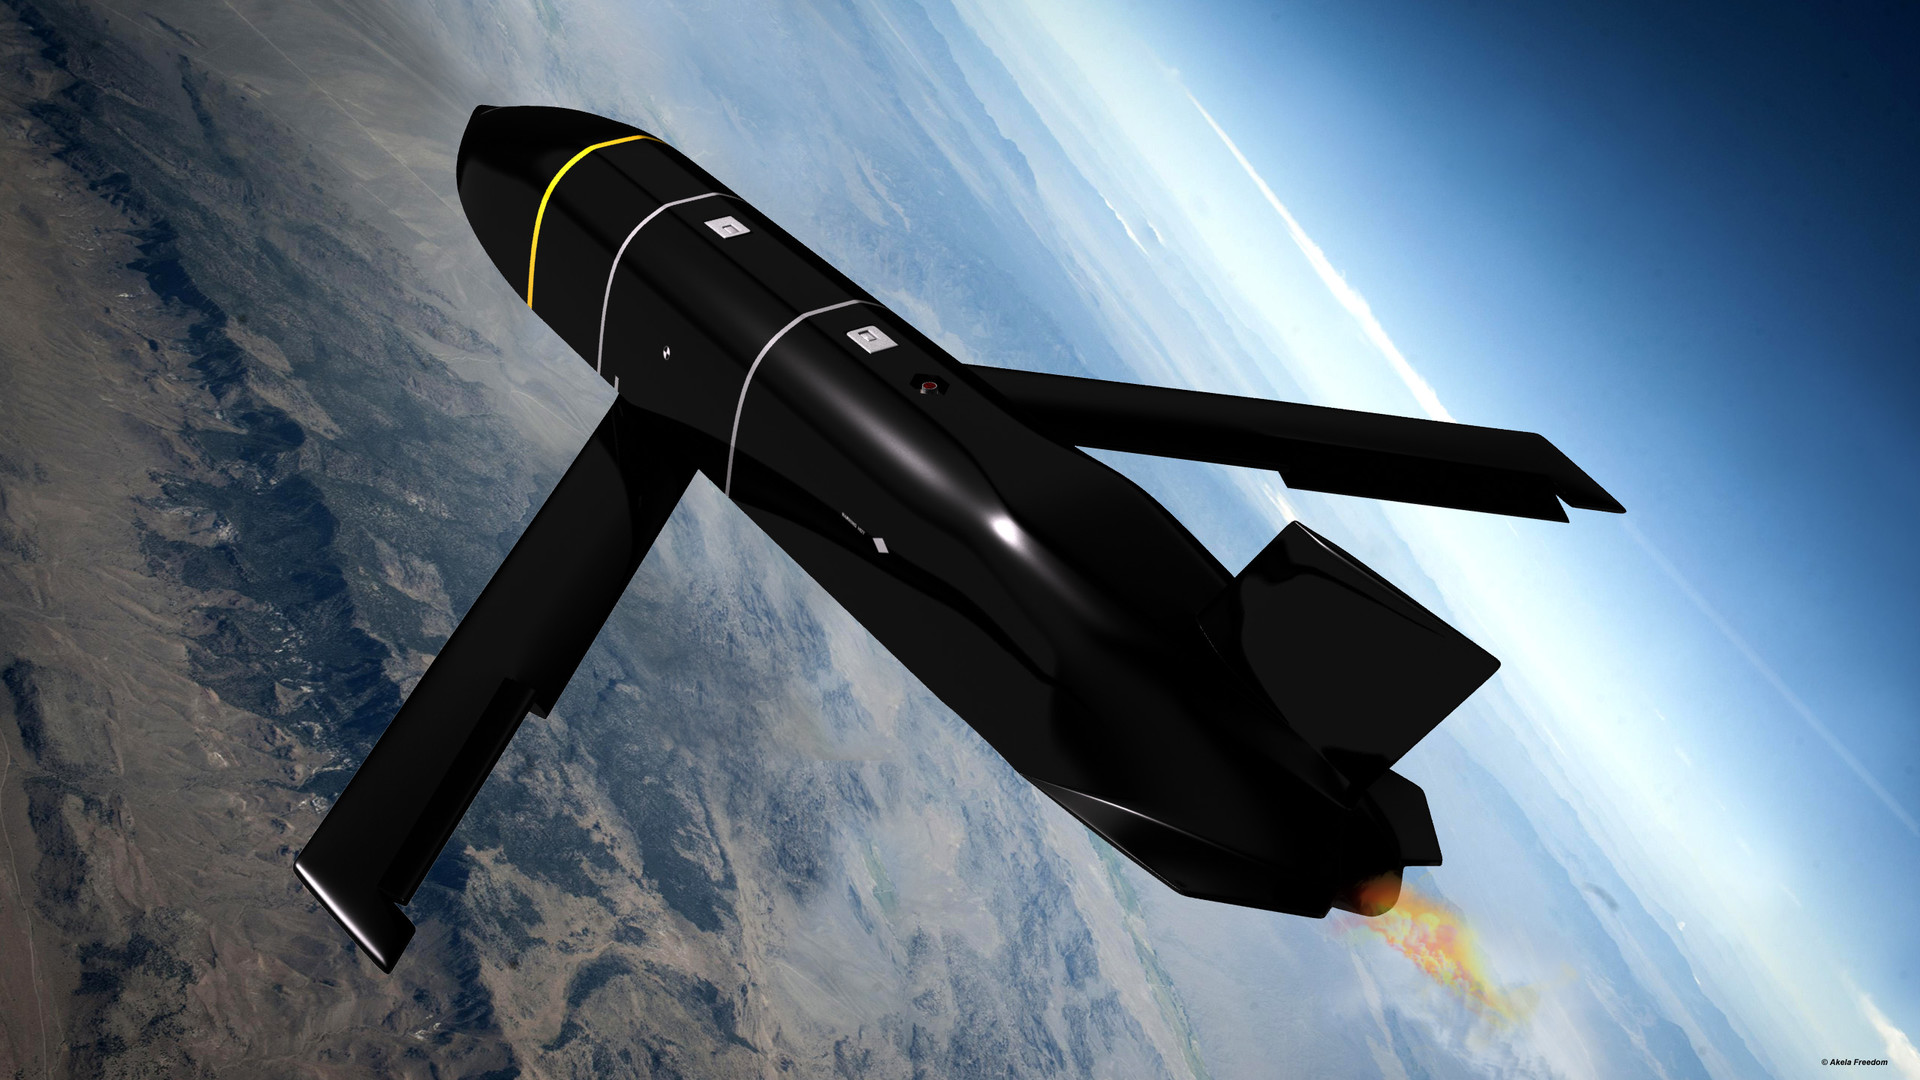 agm 158 stealth cruise missile